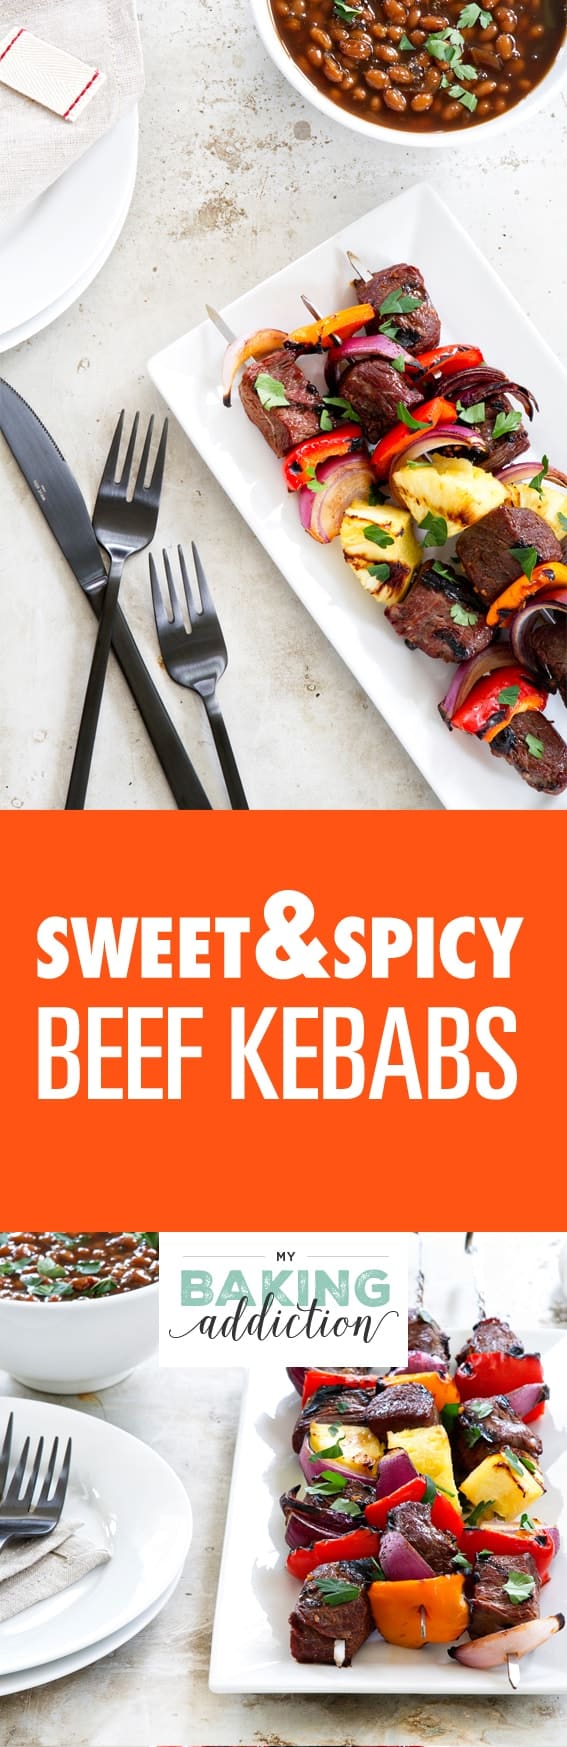 Sweet and Spicy Beef Kebabs are a delicious twist on traditional kebabs. Serve them up with baked beans and a crisp salad to create the perfect summer meal!